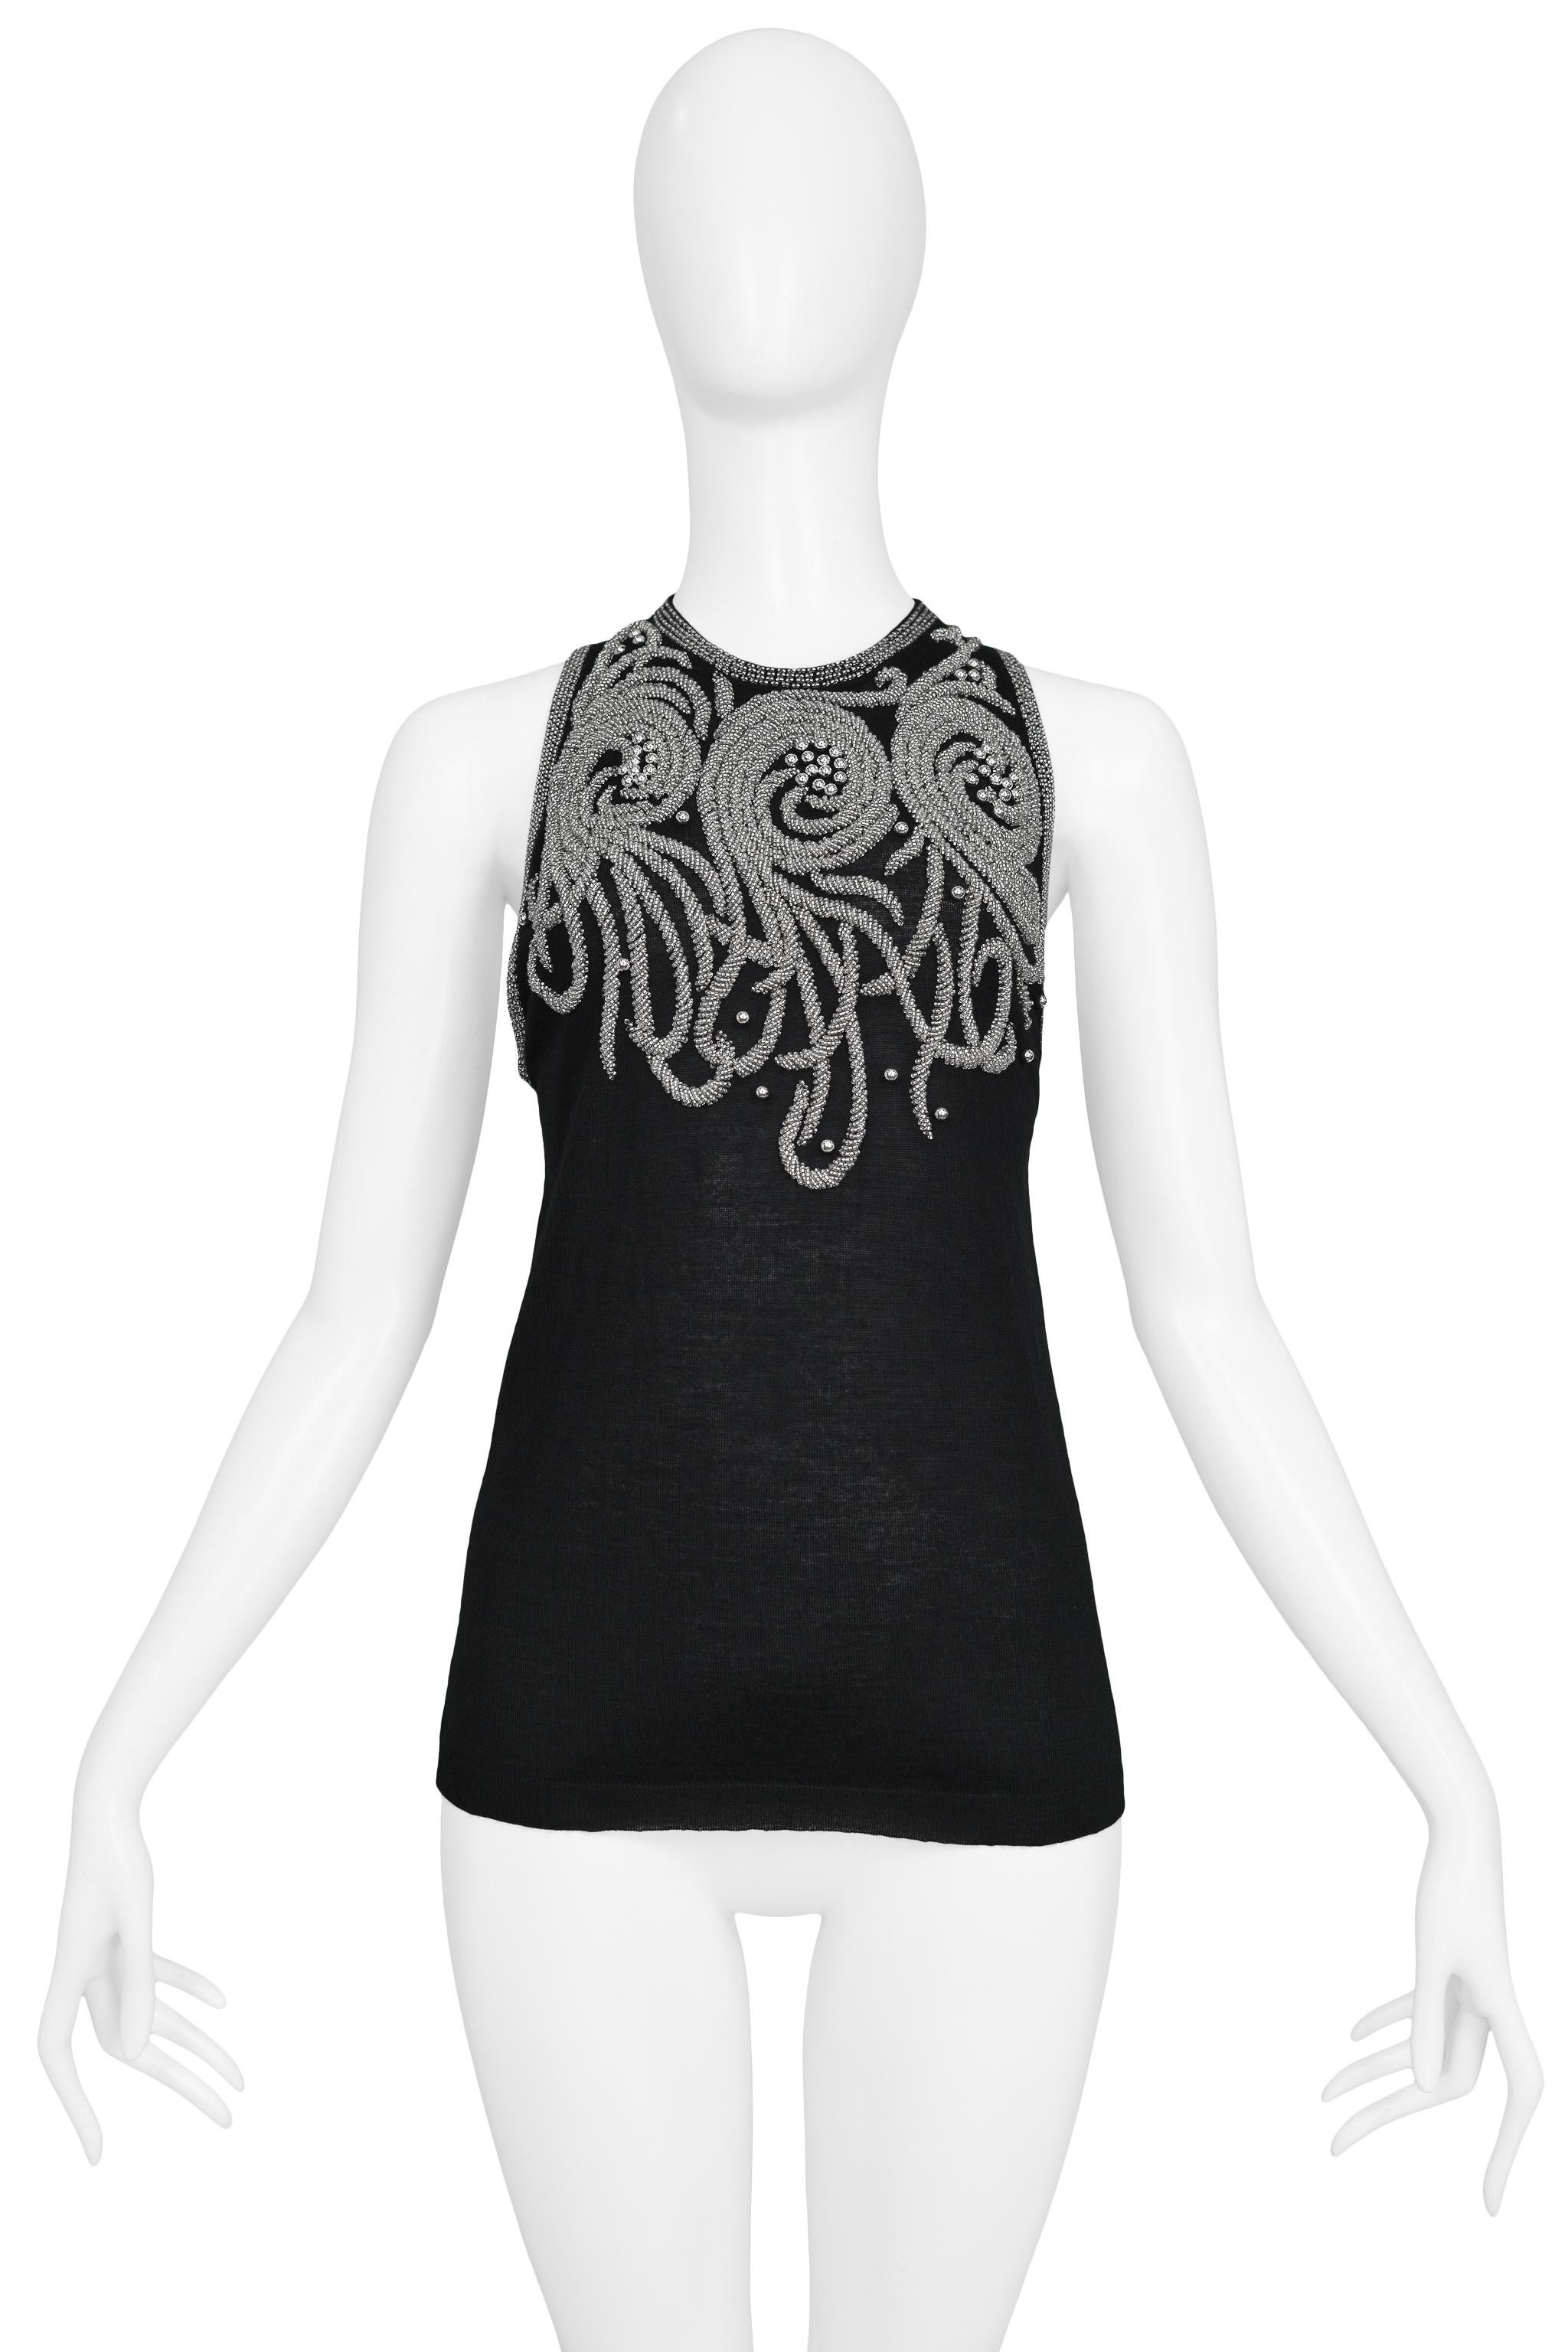 Vintage Balenciaga by Nicolas Ghesquiere black knit tank sweater featuring sleeveless body, silver beading, and keyhole back. 

Balenciaga Label
Designed By Nicolas Ghesquiere
Size 40
Knit
Excellent Vintage Condition
Authenticity Guaranteed 